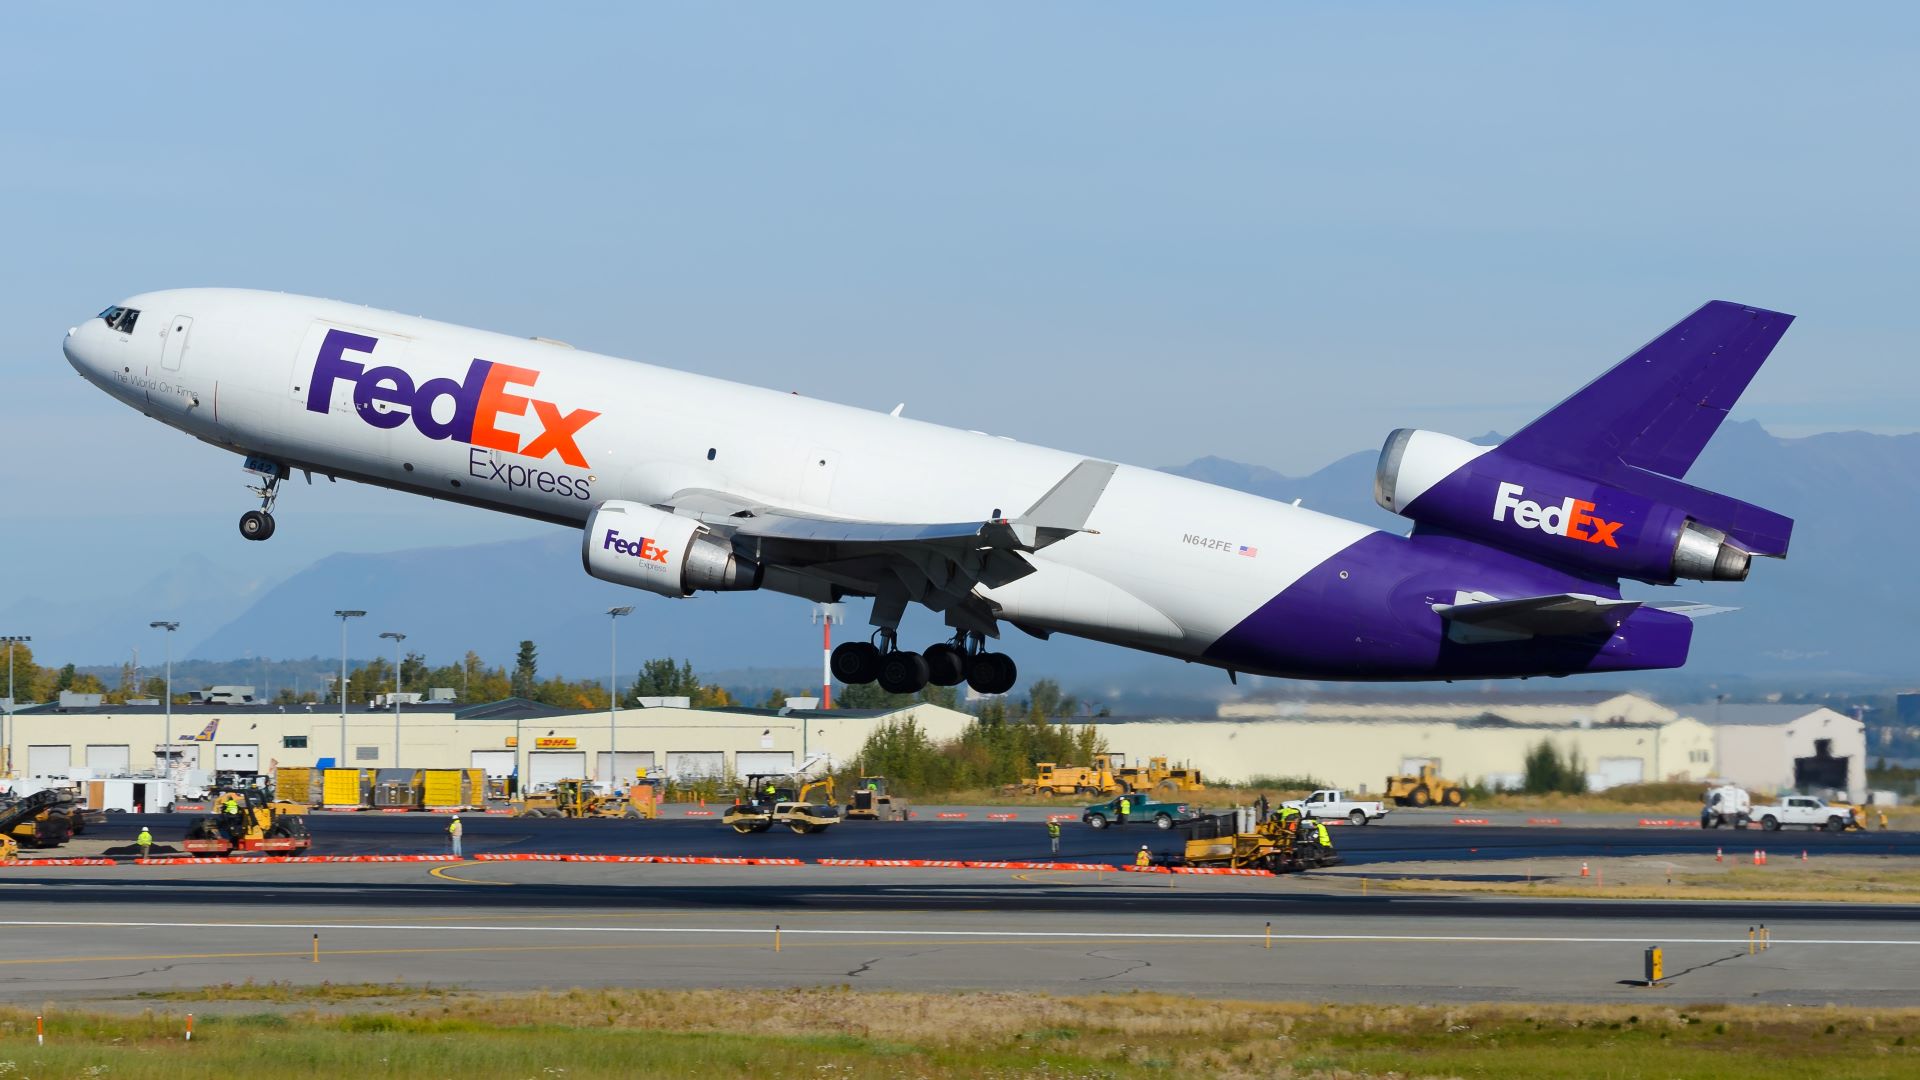 A white FedEx jet with a blue tail lifts off the runway with warehouses in the background.